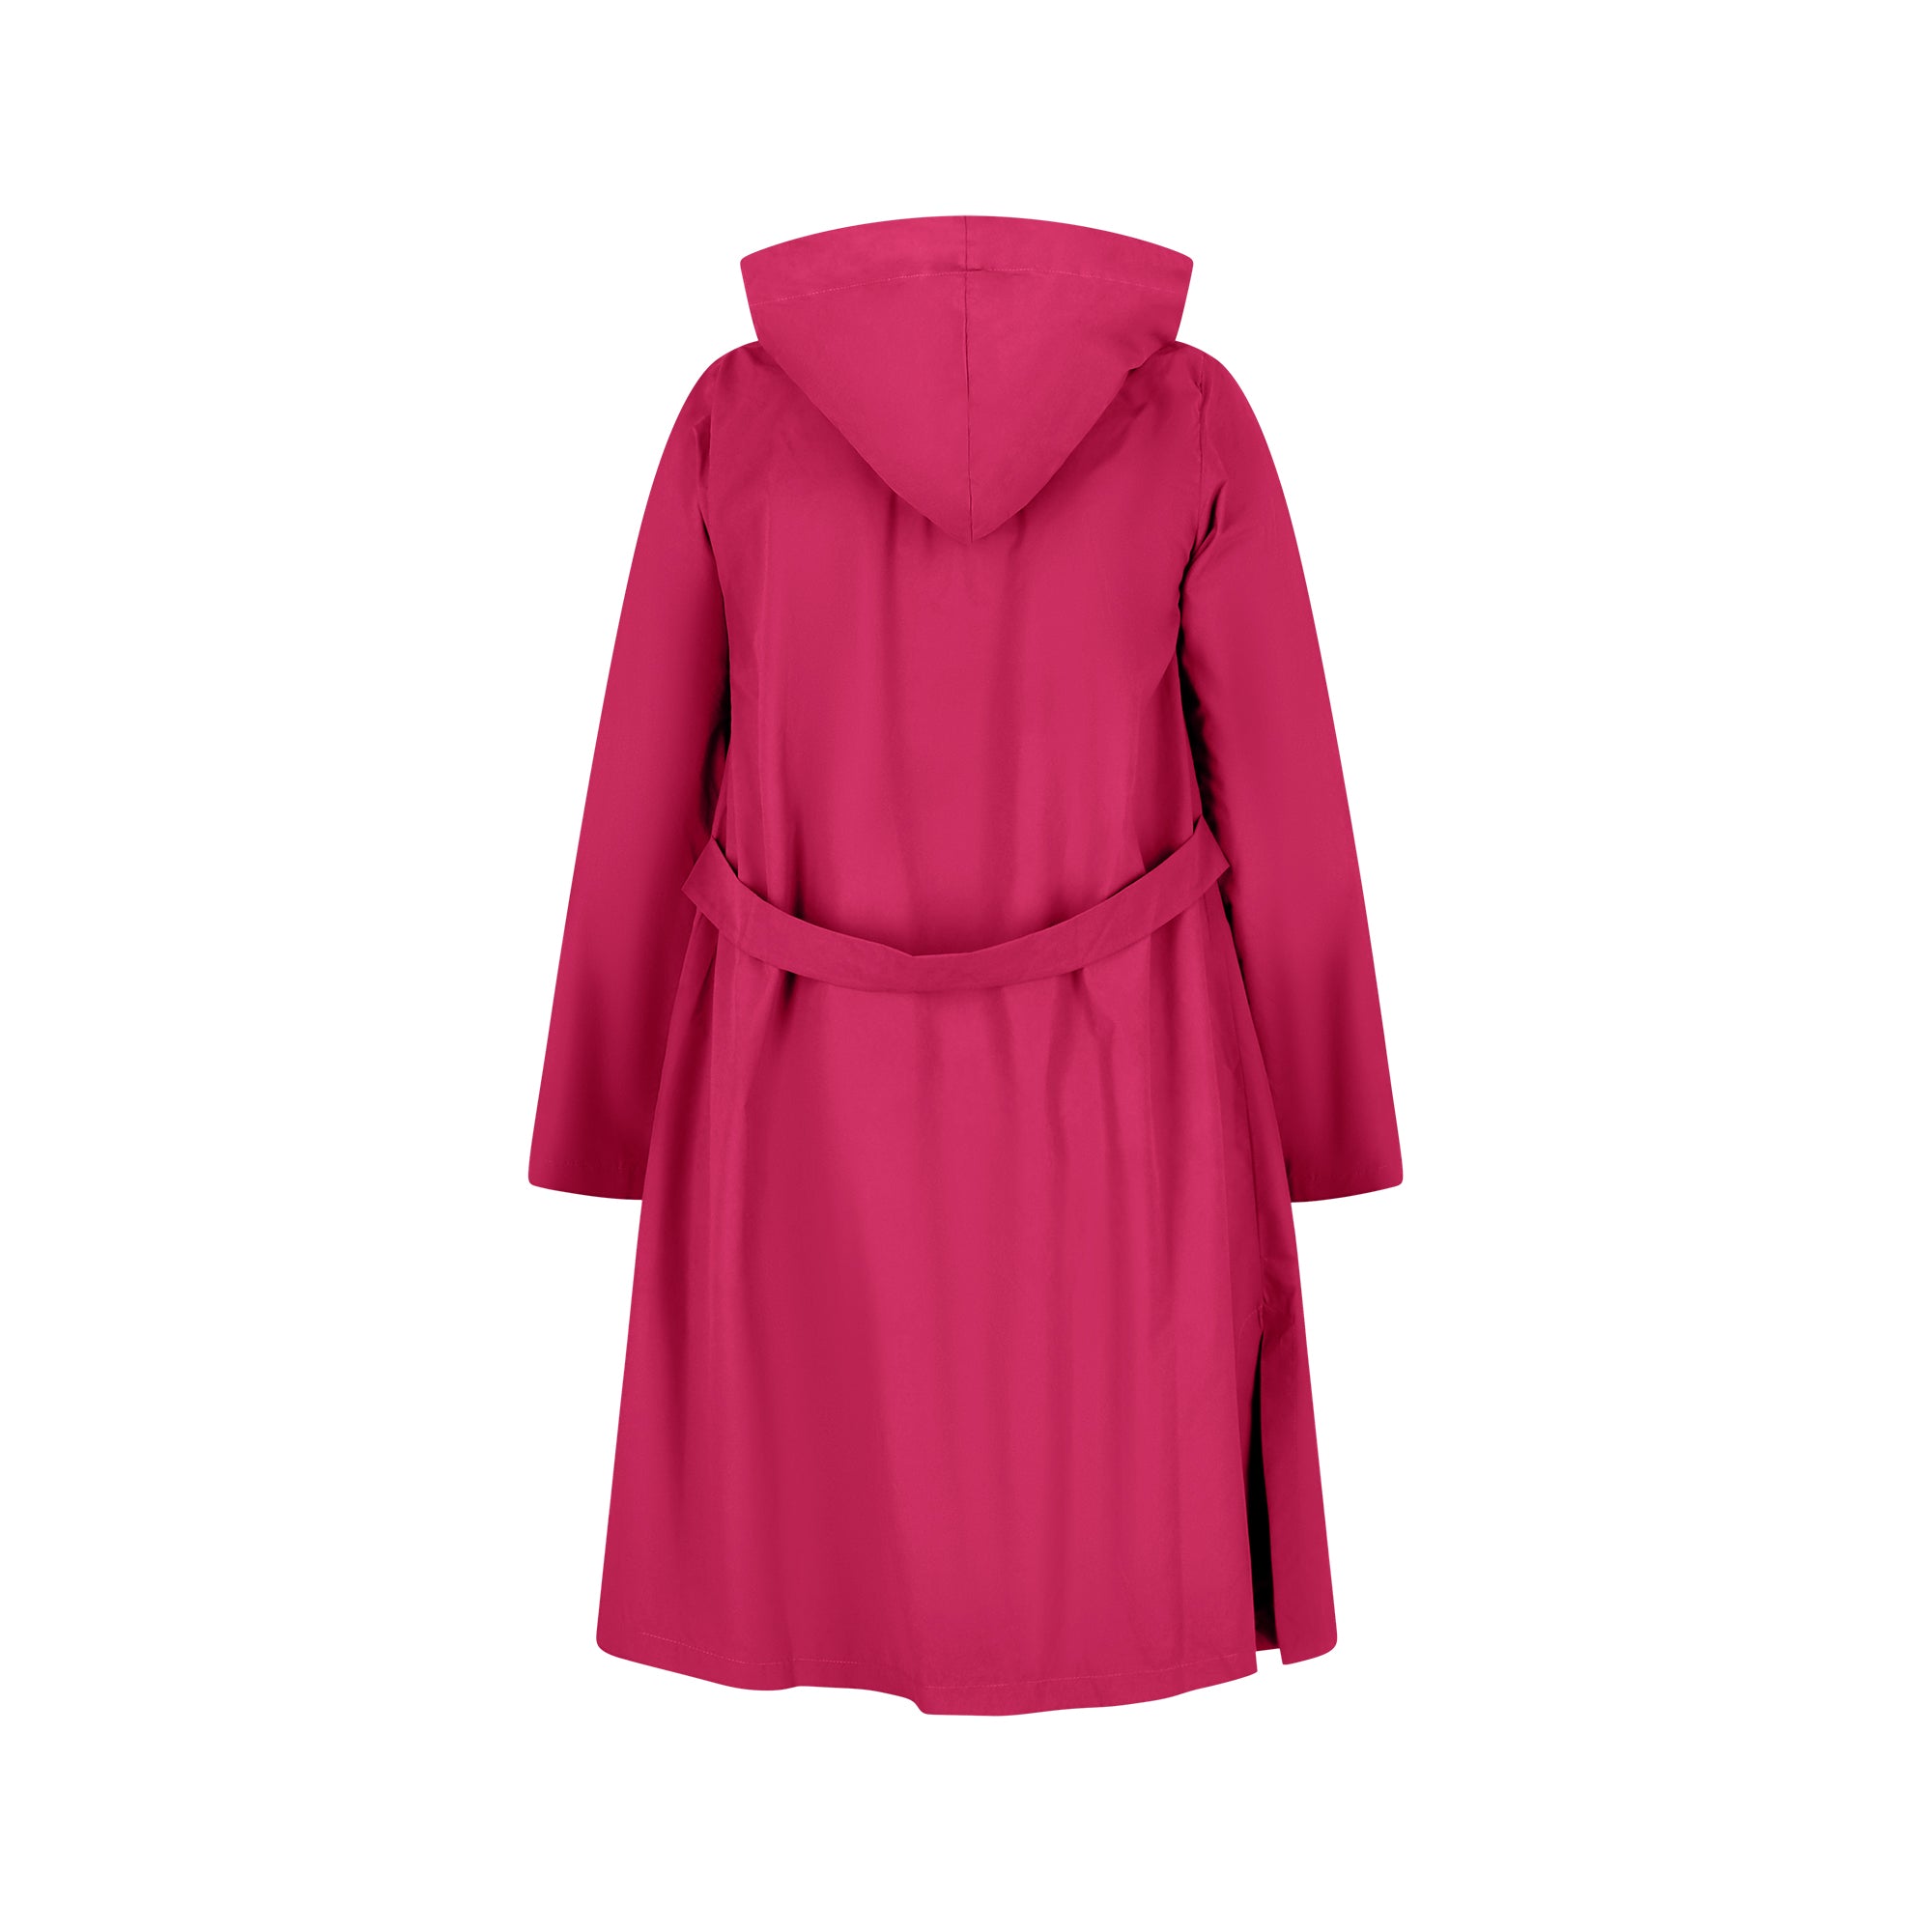 The classic raincoat - cherry color - back view